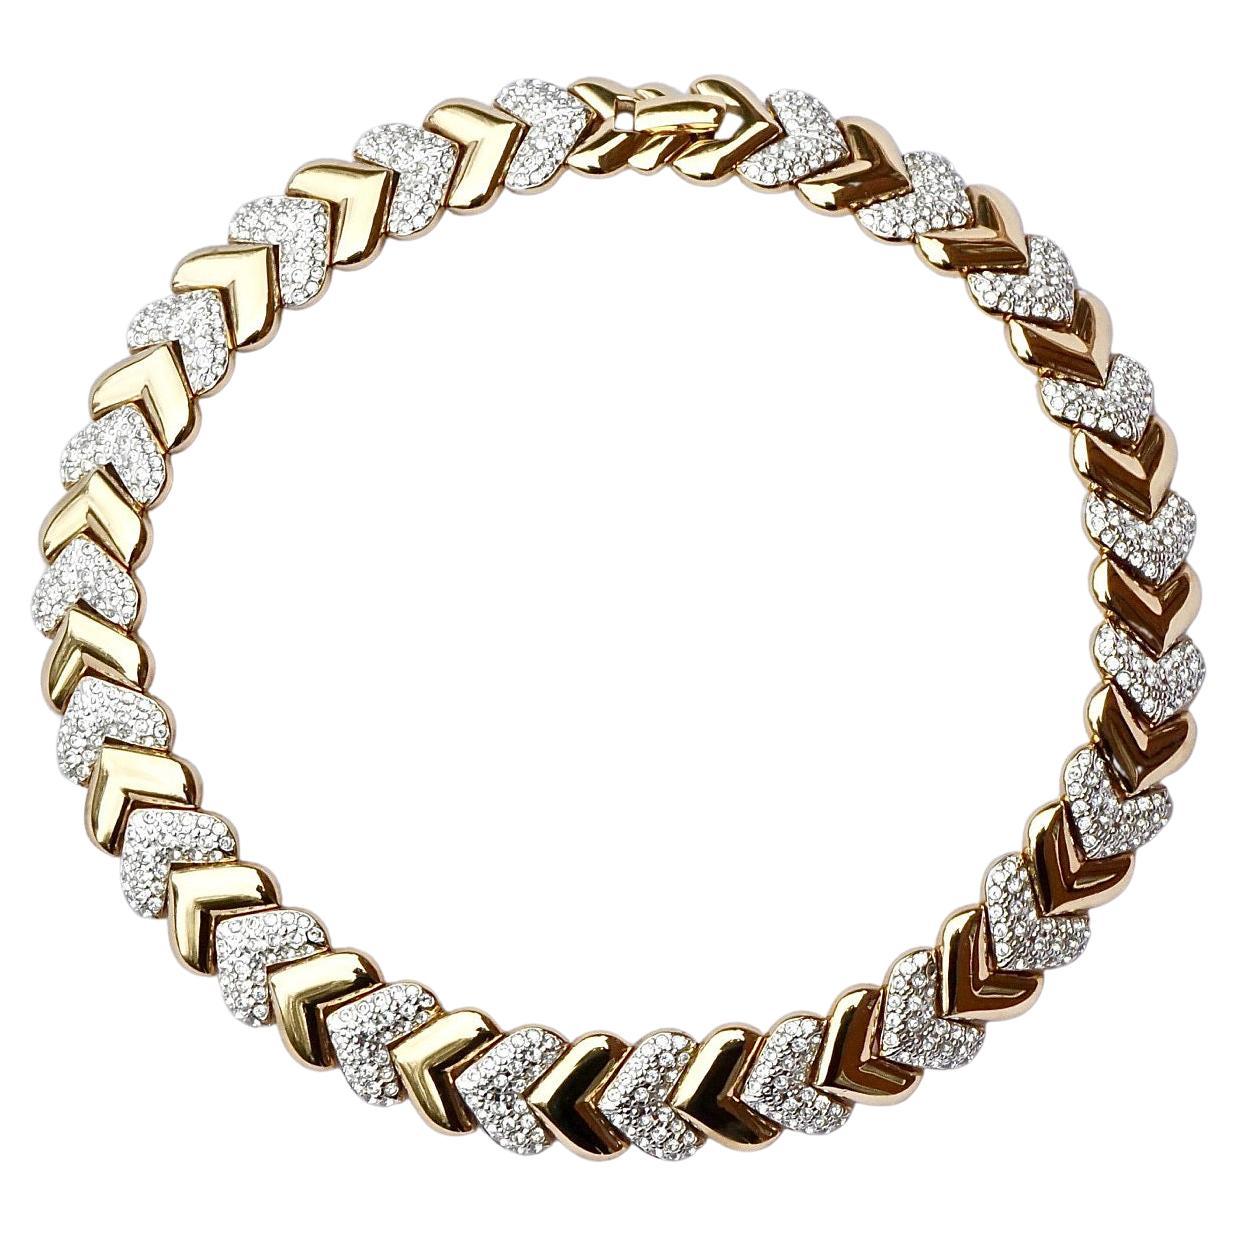 Gold Plated and Rhinestone Heavy Chevron Collar Necklace circa 1980s For Sale